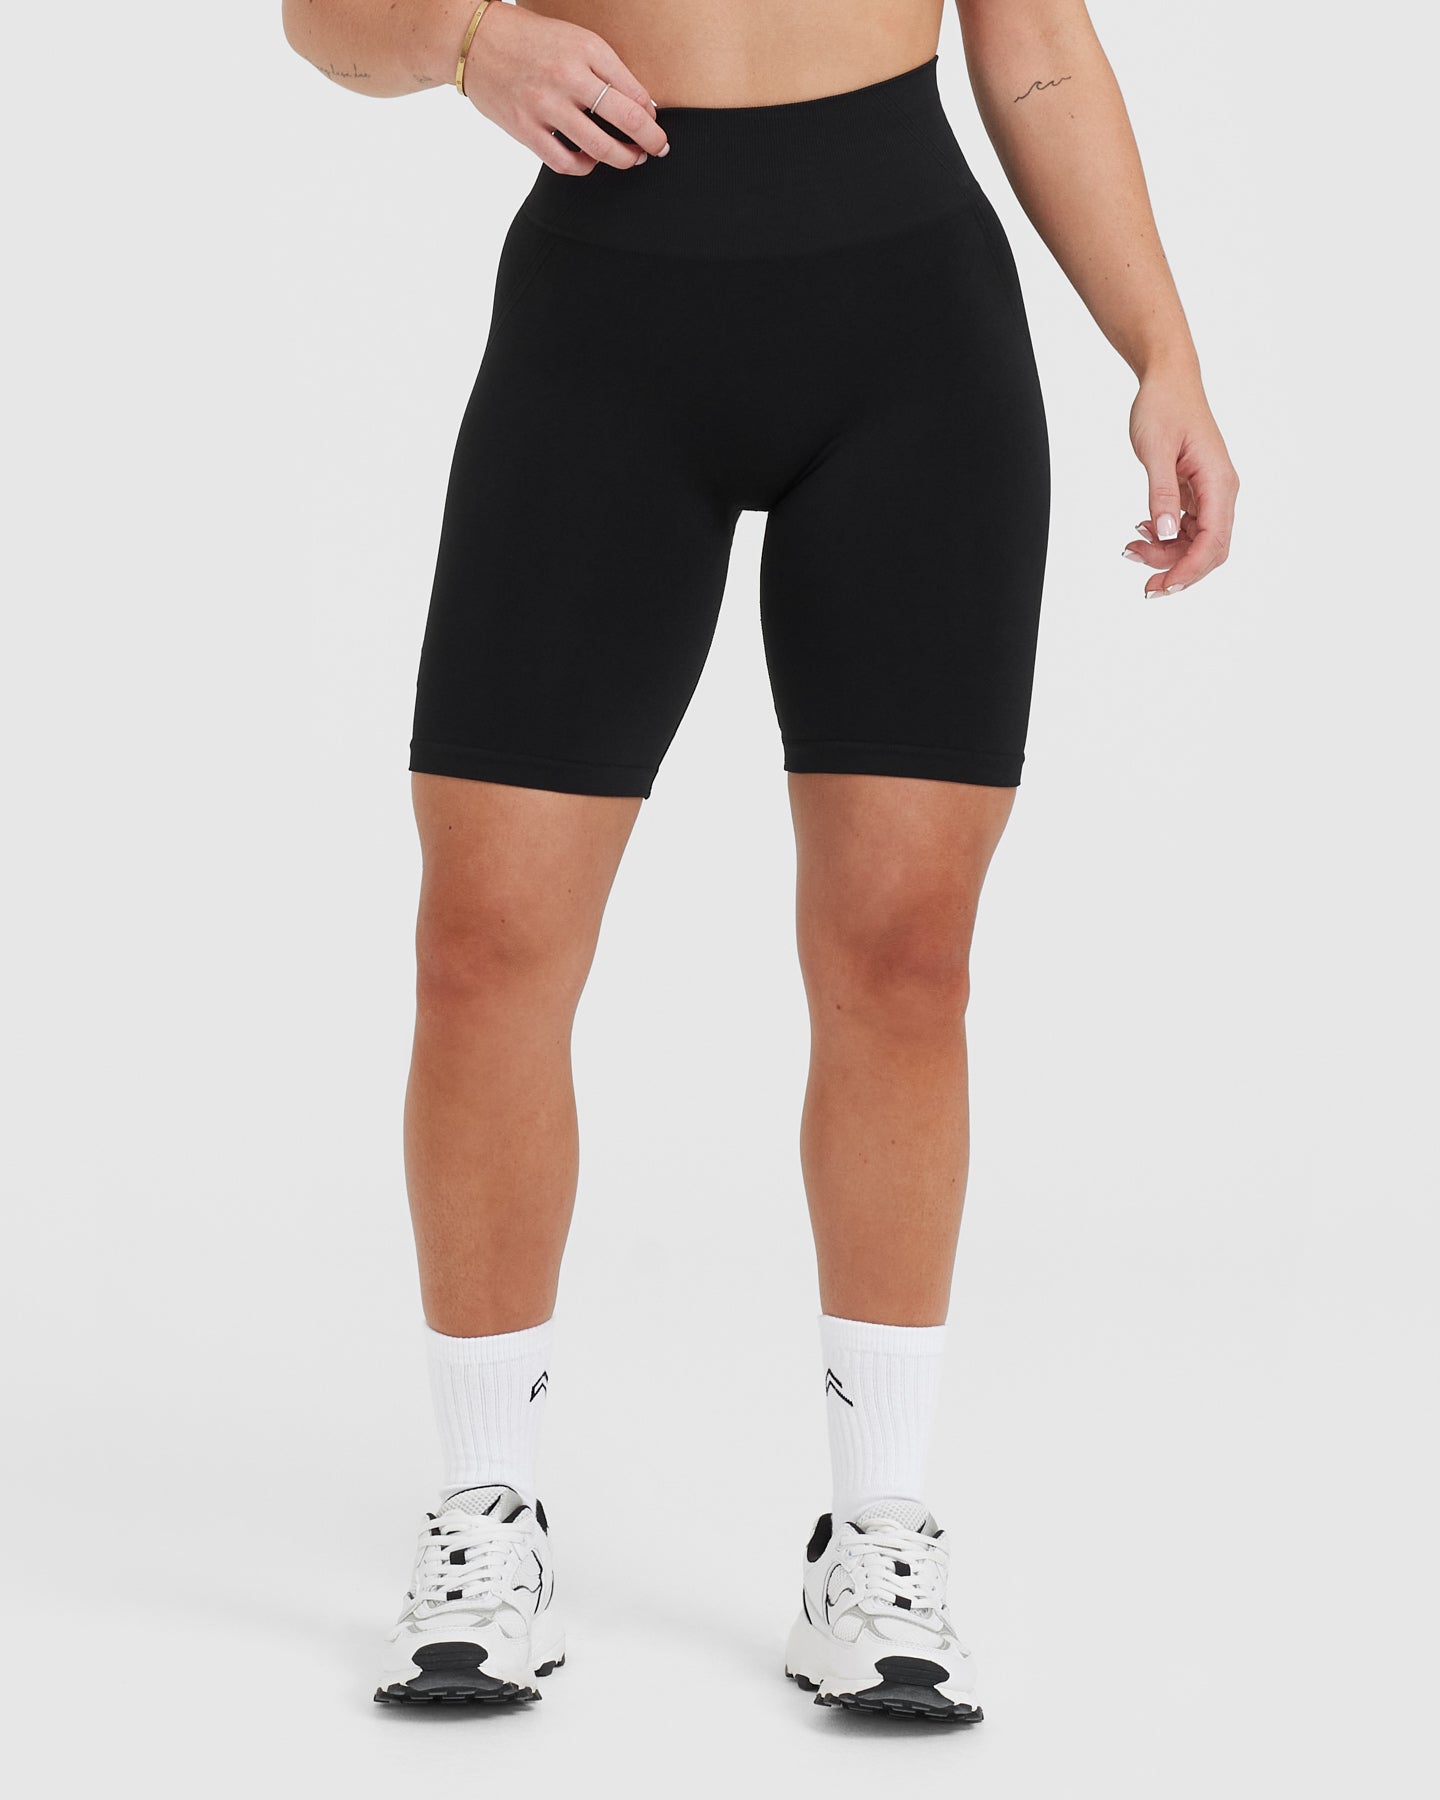 Effortless Seamless Cycling Shorts 2 Z8TTDL282 Clothing Rosewood Oner  Active [Z8TTDL282] : Fabric Clothing on Oner Active Canada, Oner Active  shorts feature a unique 360 degress design, making you look and feel